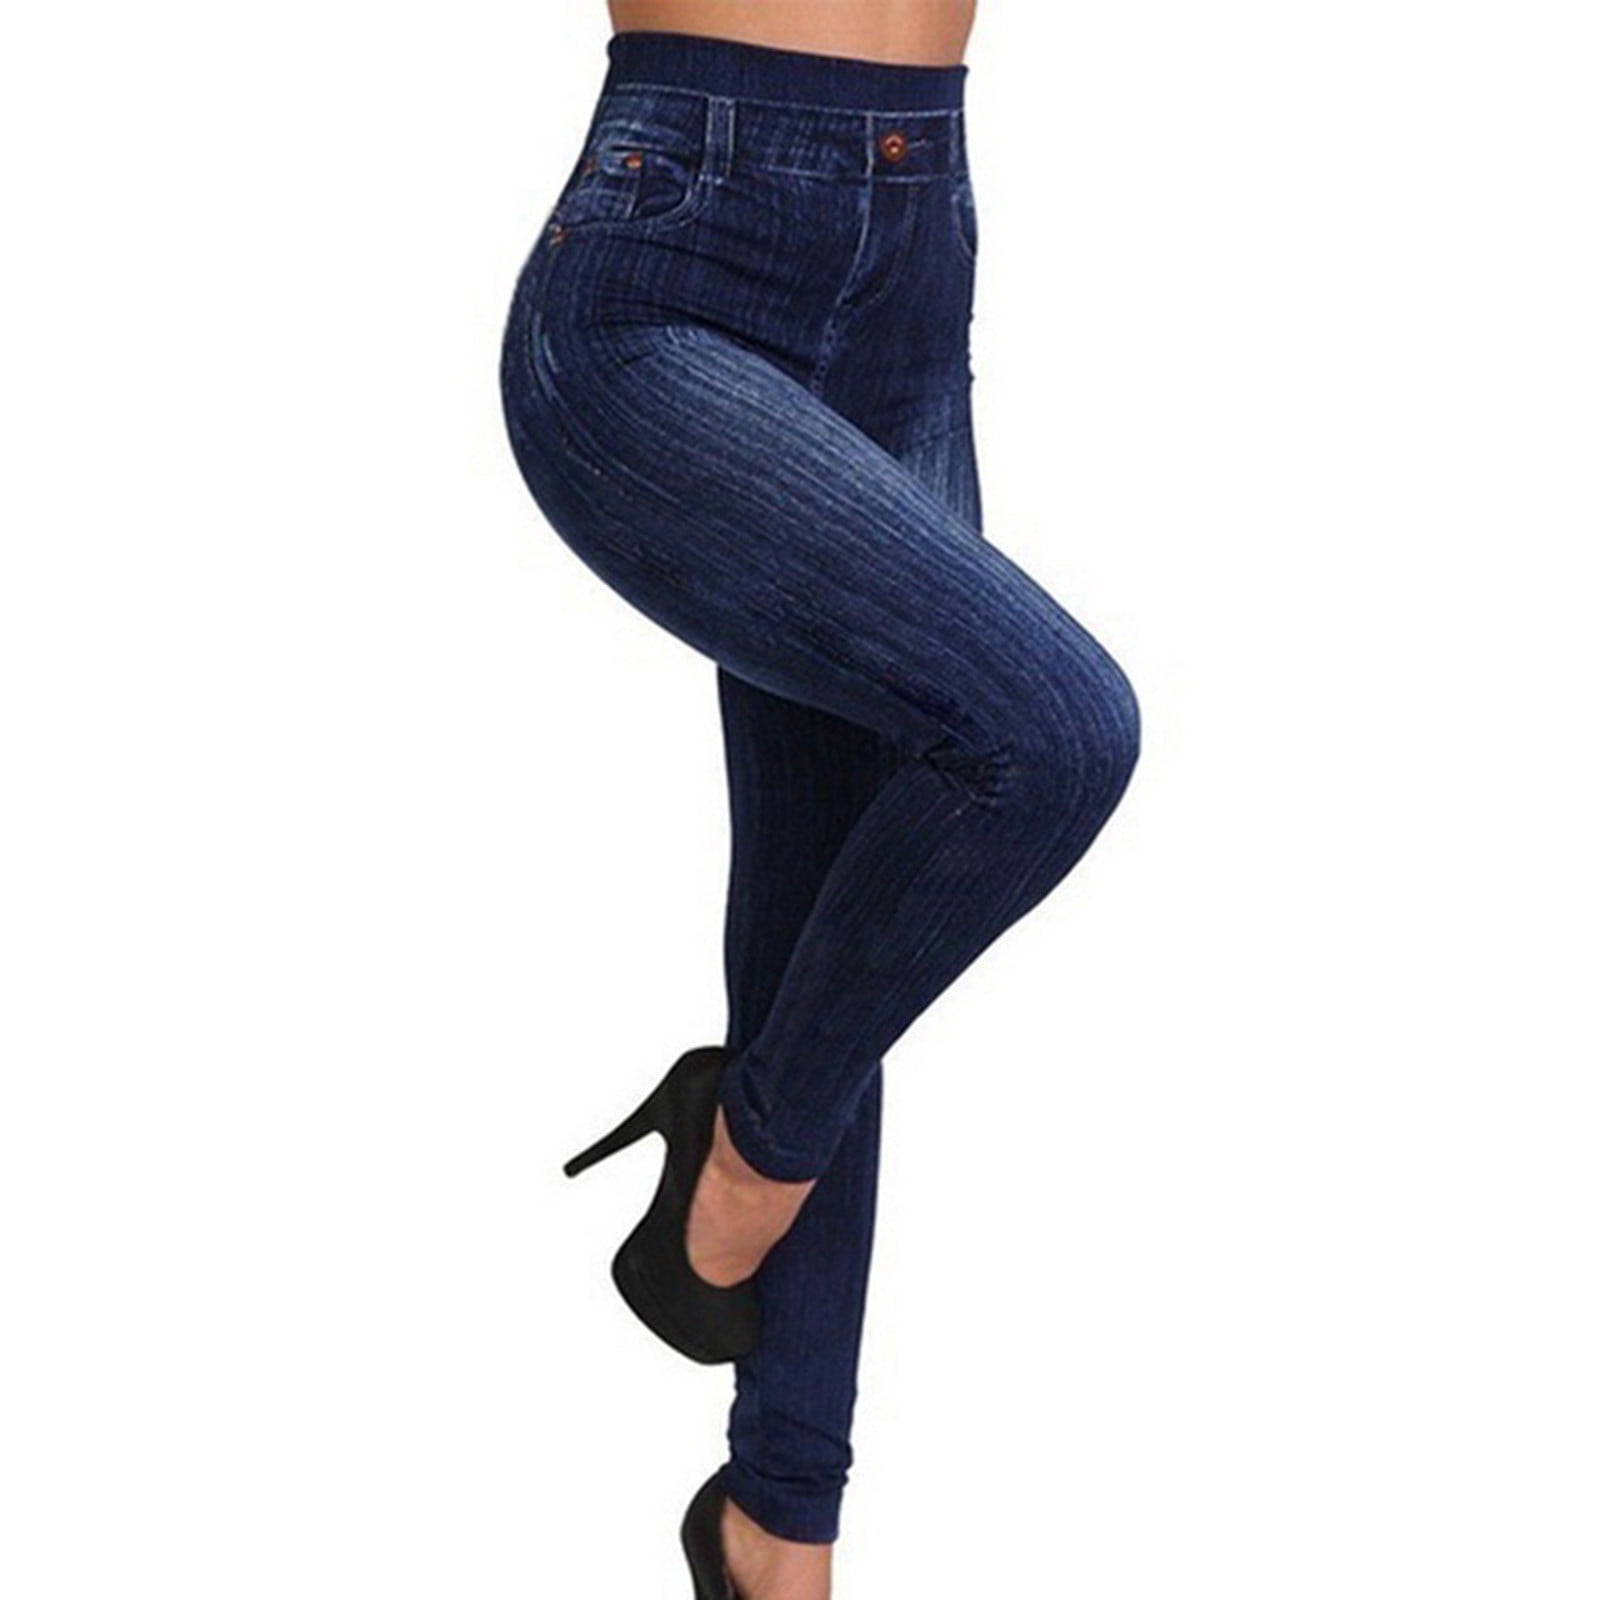 Lolmot Jeggings for Women Stretchy High Waist Jeans Slim Fit Skinny Pull on  Denim Leggings with Pockets on Clearance 